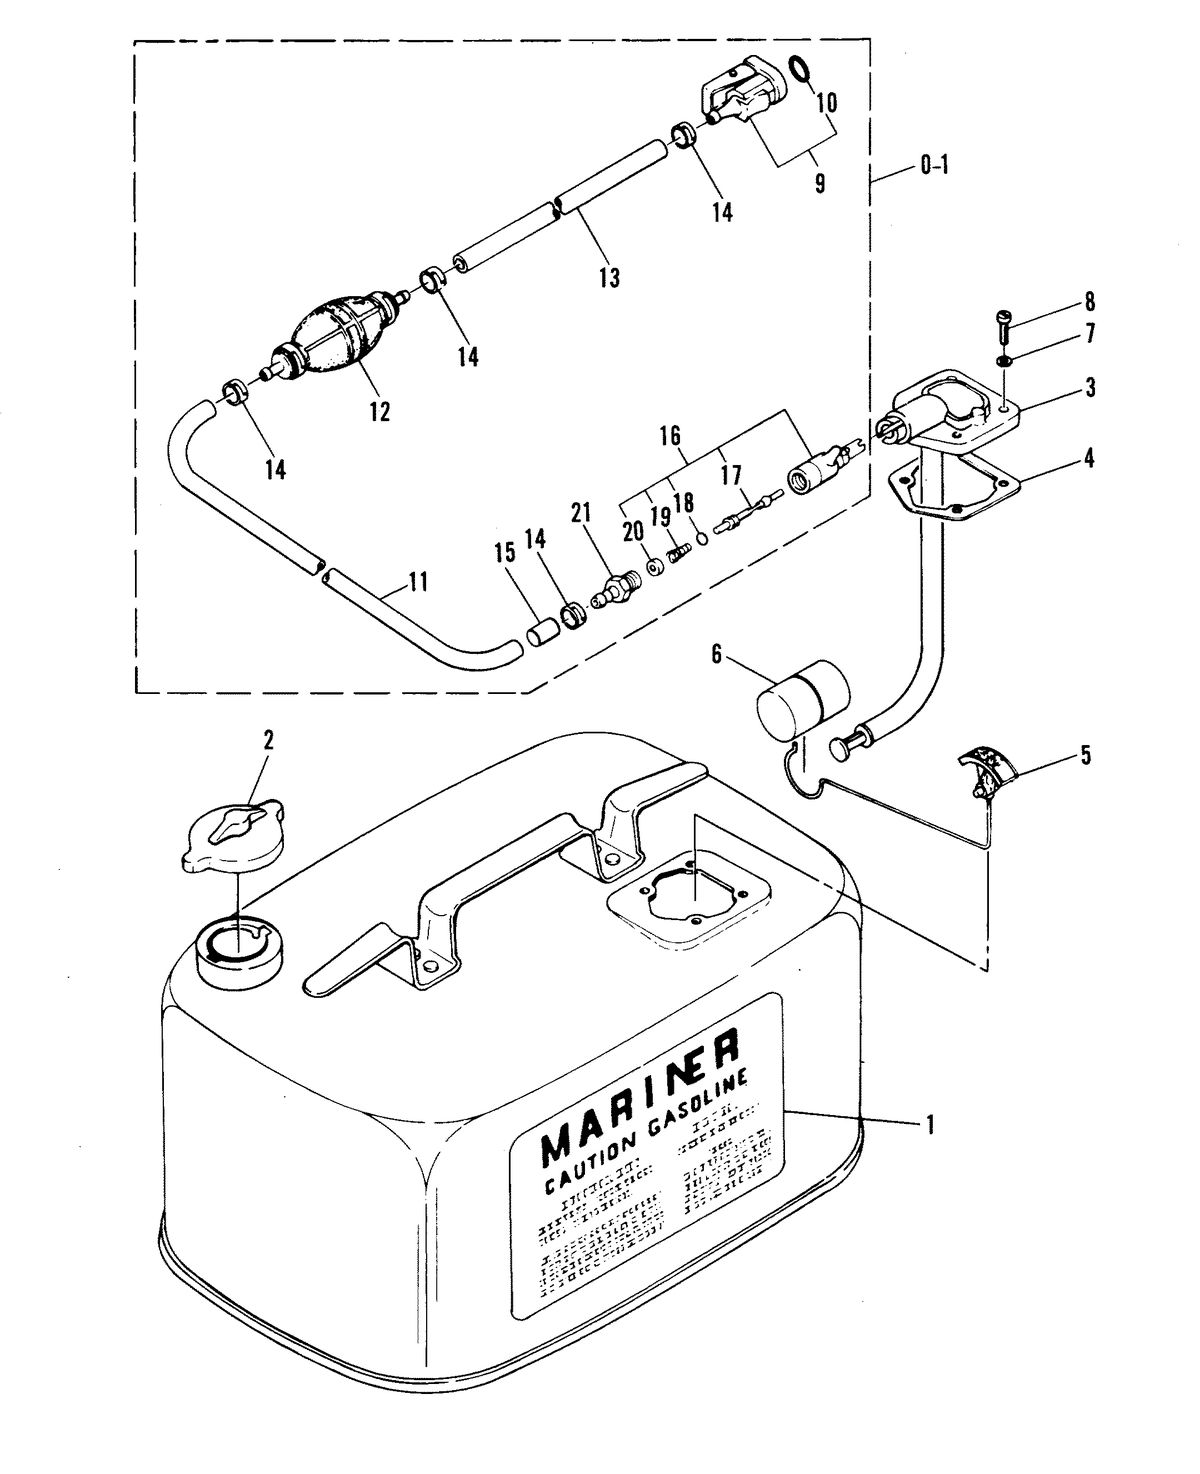 MARINER MARINER 40 FUEL TANK AND FUEL LINE ASSEMBLY